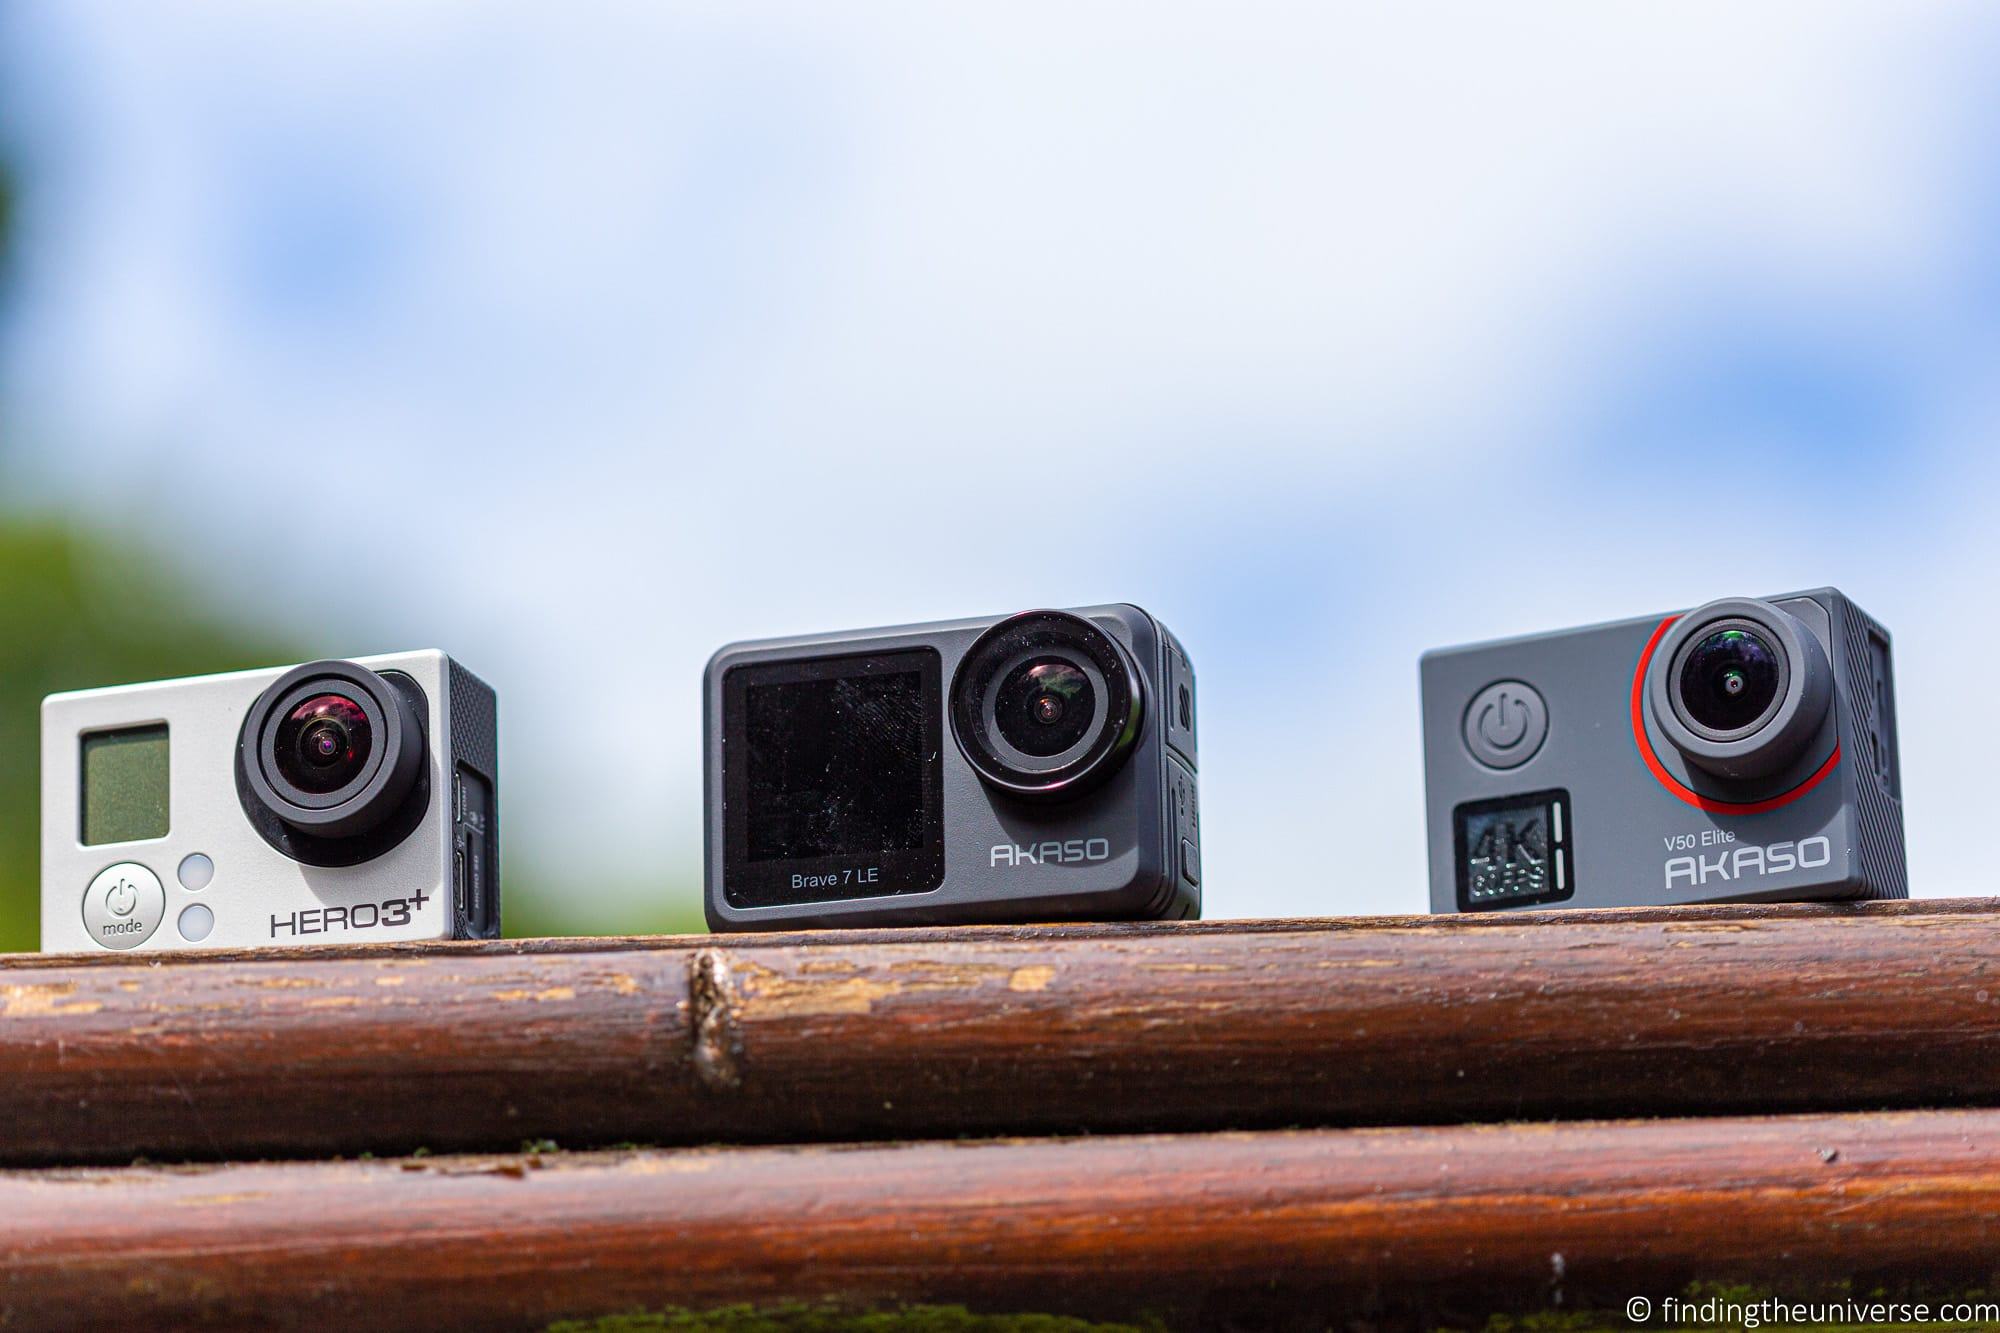 This 4K Action Camera was Meant to be GREAT: Akaso Brave 4 Elite Review 